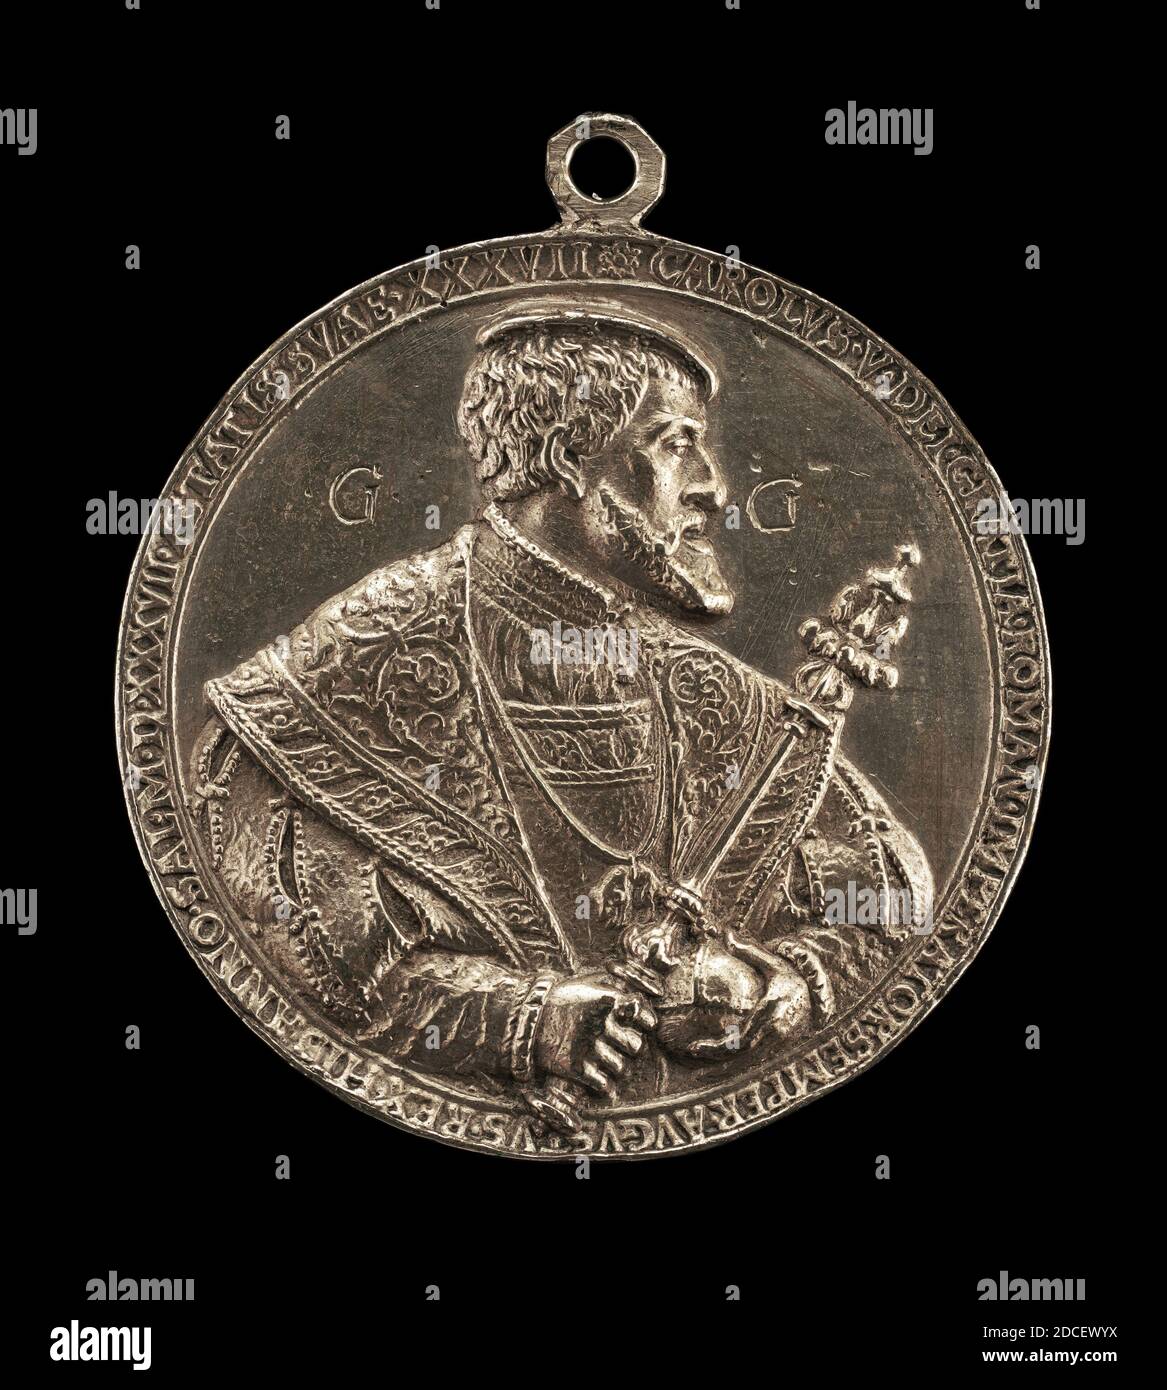 Hans Reinhart the Elder, (medalist), German, c. 1510 - 1581, Charles V, 1500-1558, King of Spain 1516-1556, Holy Roman Emperor 1519, 1537, silver/With loop, overall (height with suspension loop): 7.16 cm (2 13/16 in.), overall (diameter without loop): 6.38 cm (2 1/2 in.), gross weight: 58.31 gr (0.129 lb.), axis: 12:00 Stock Photo